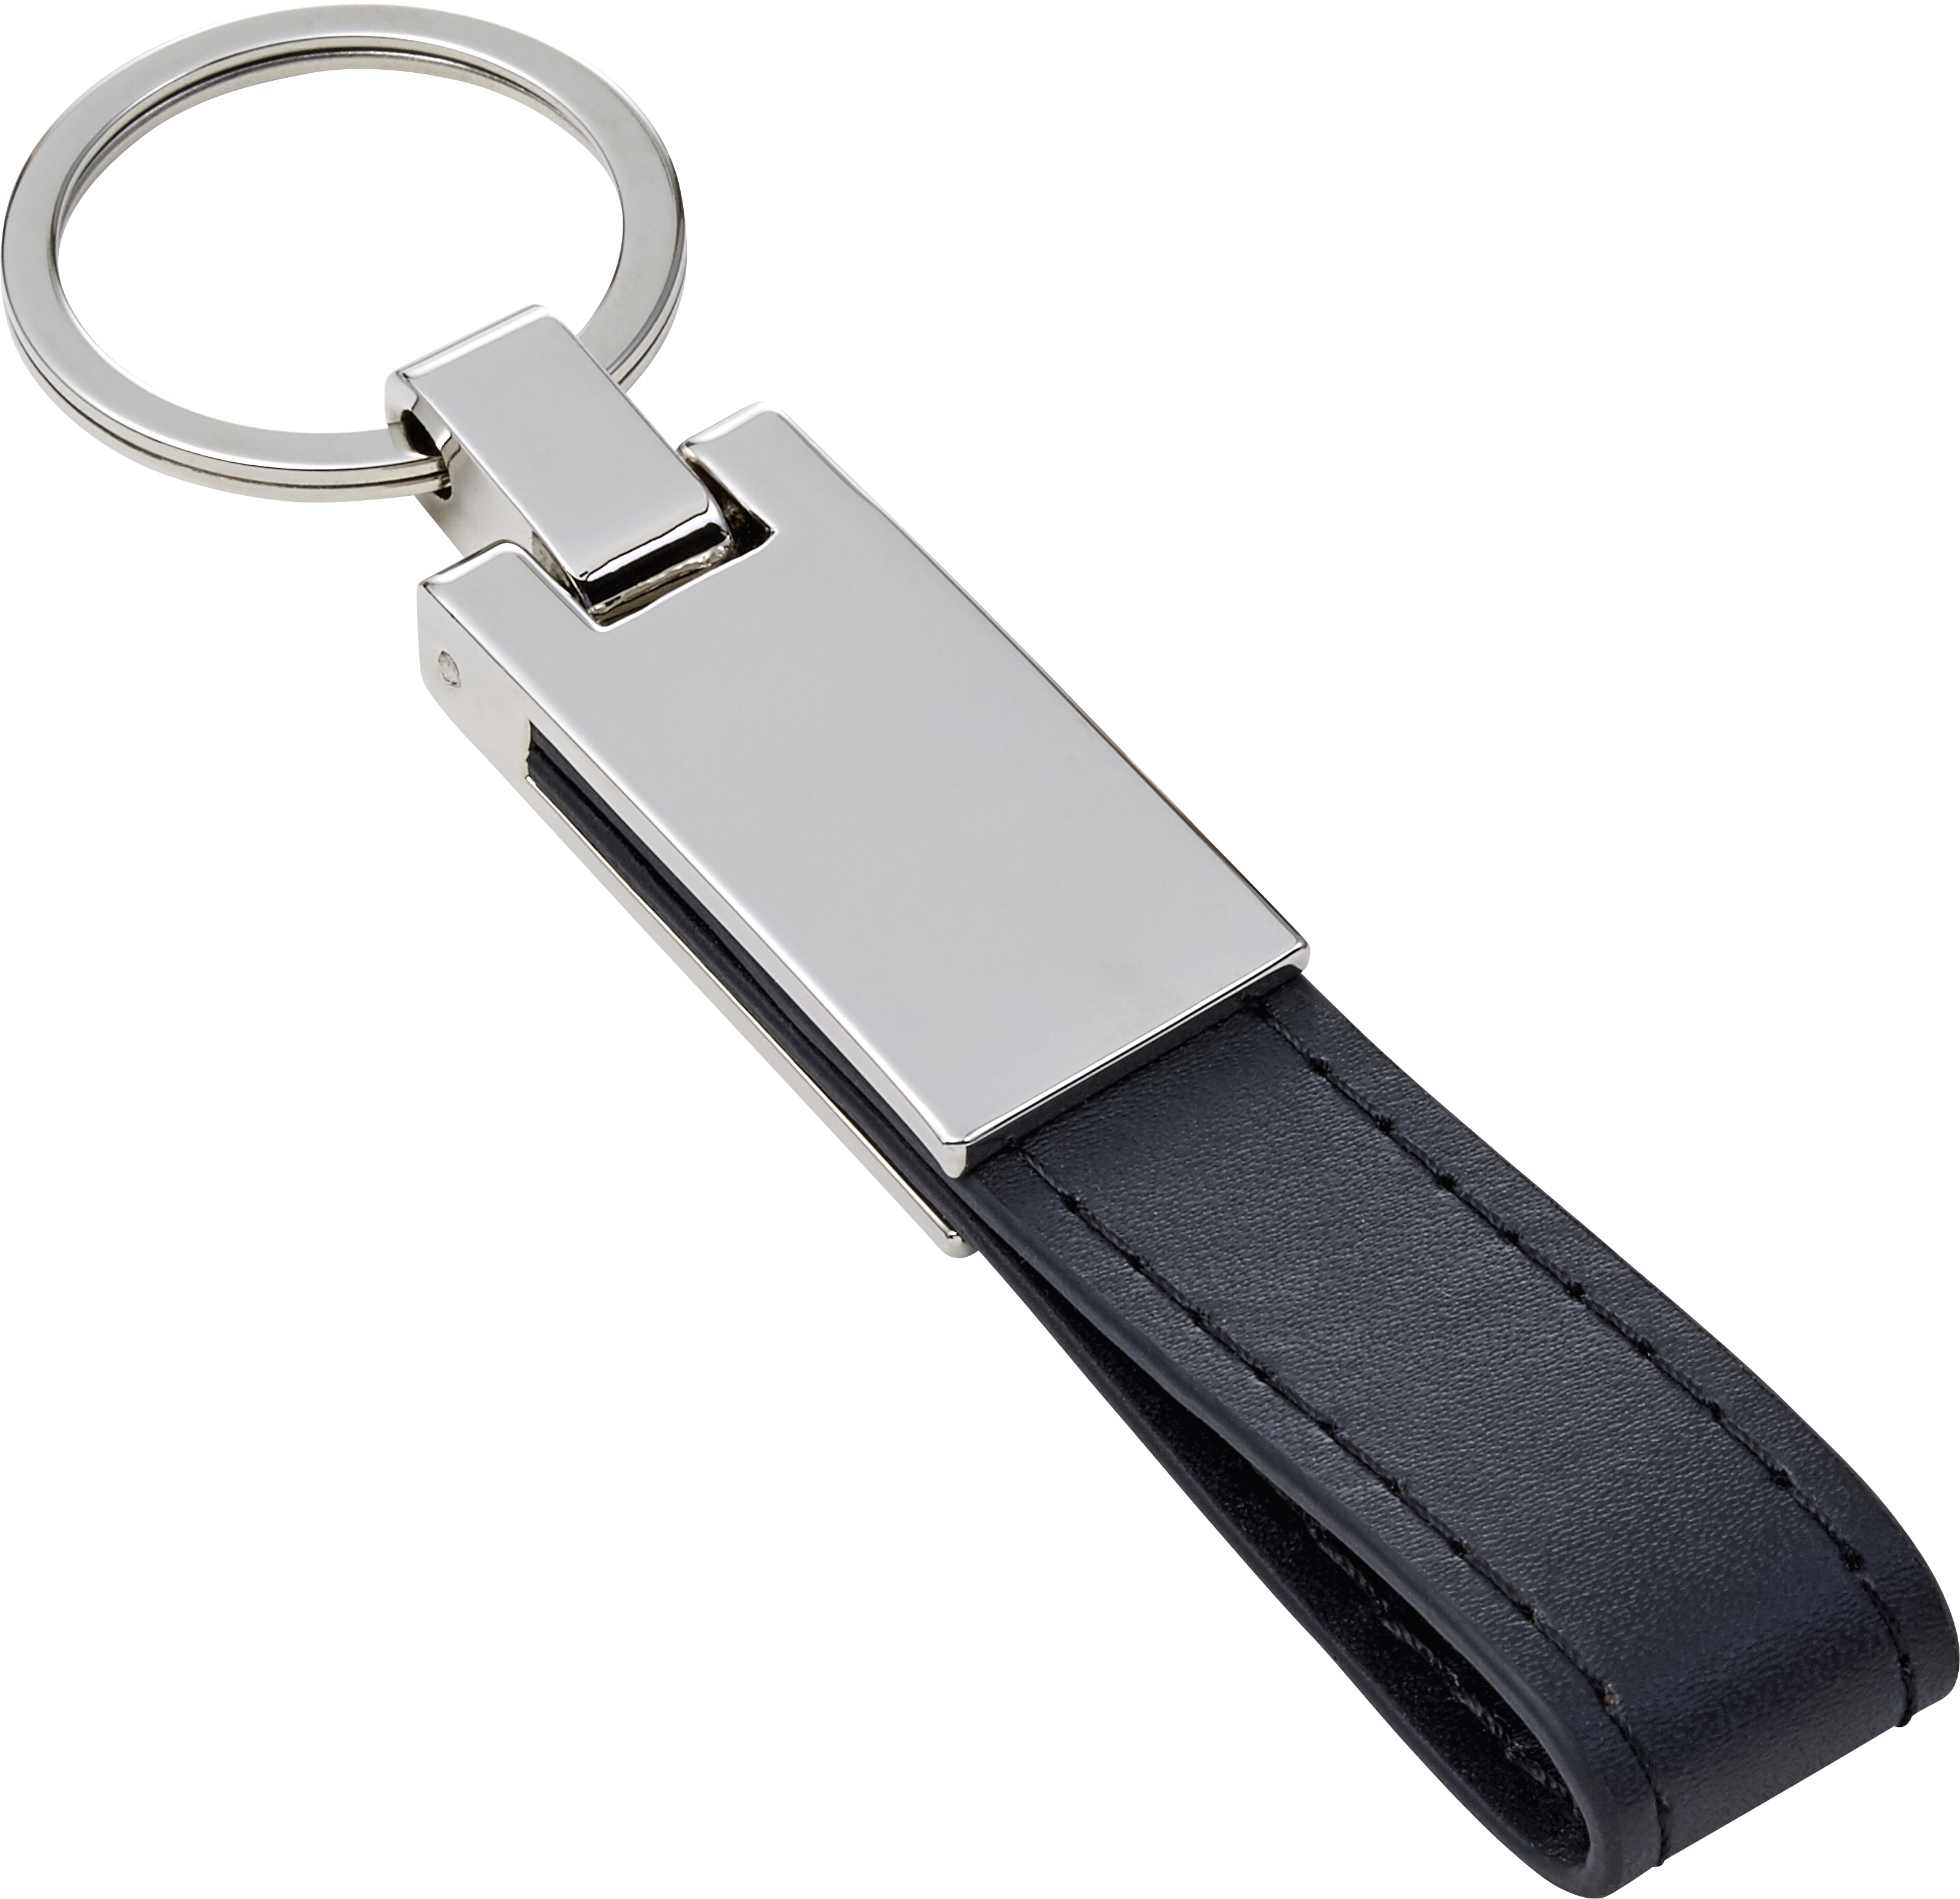 008779 001999999 3d045 rgt pro01 fal - Key chain with PU loop